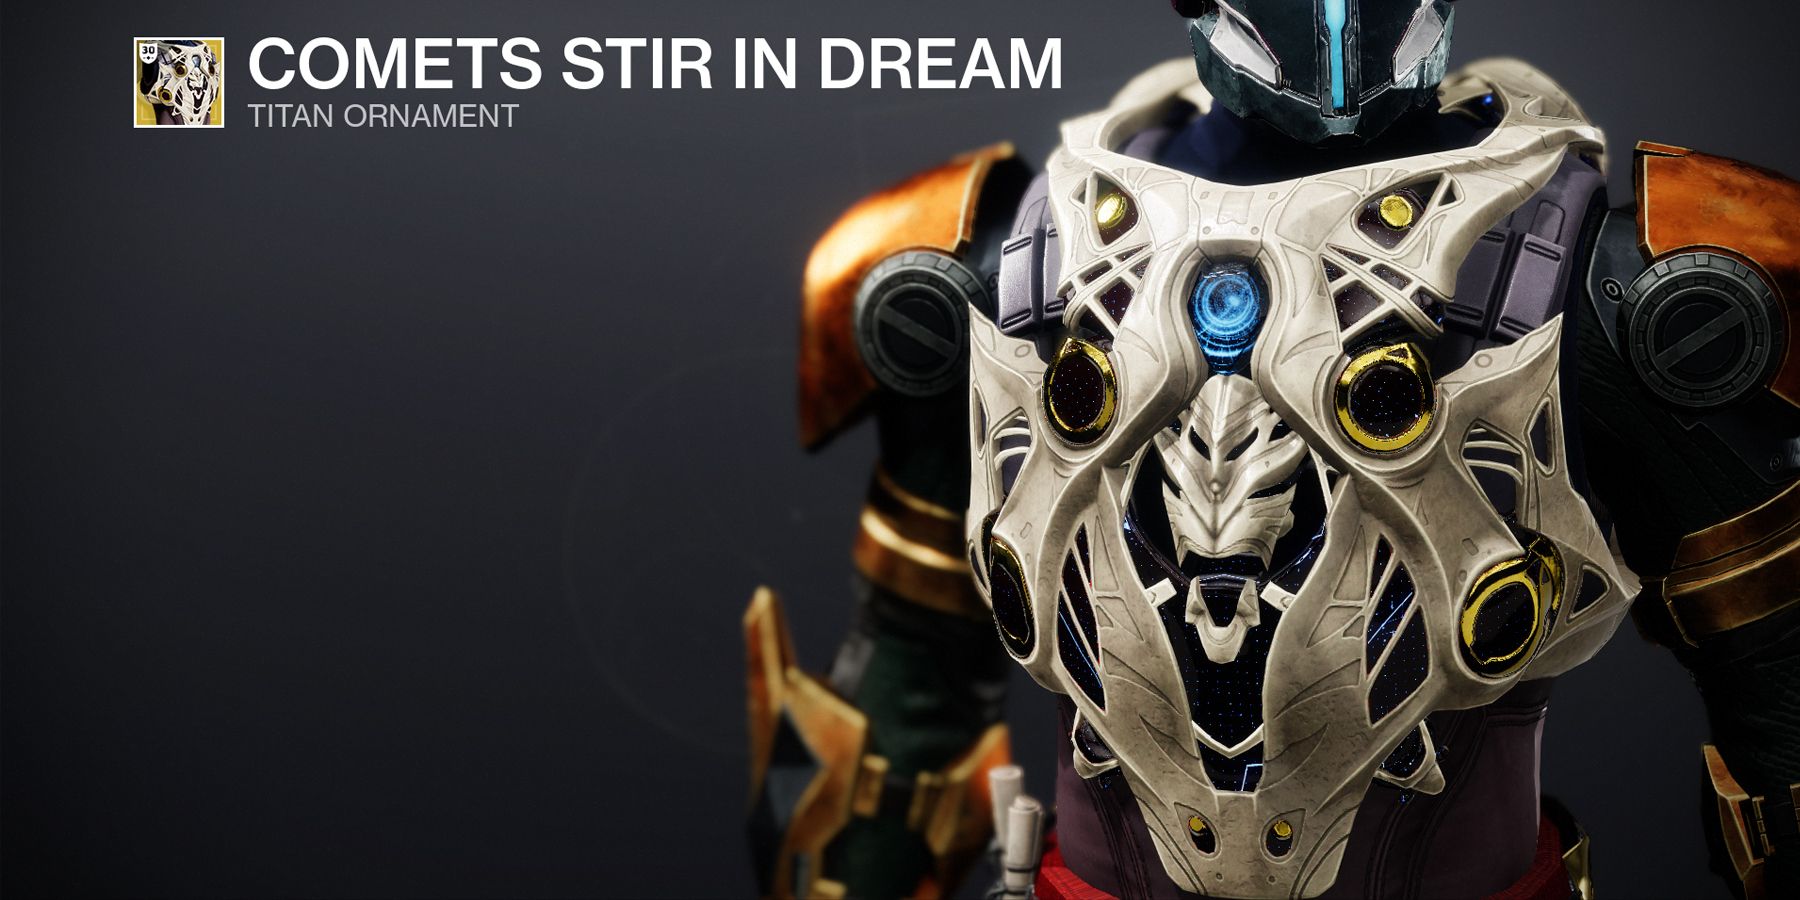 The new Comets Stir in Dream armor ornament for Cuirass of the Falling Star in Destiny 2.